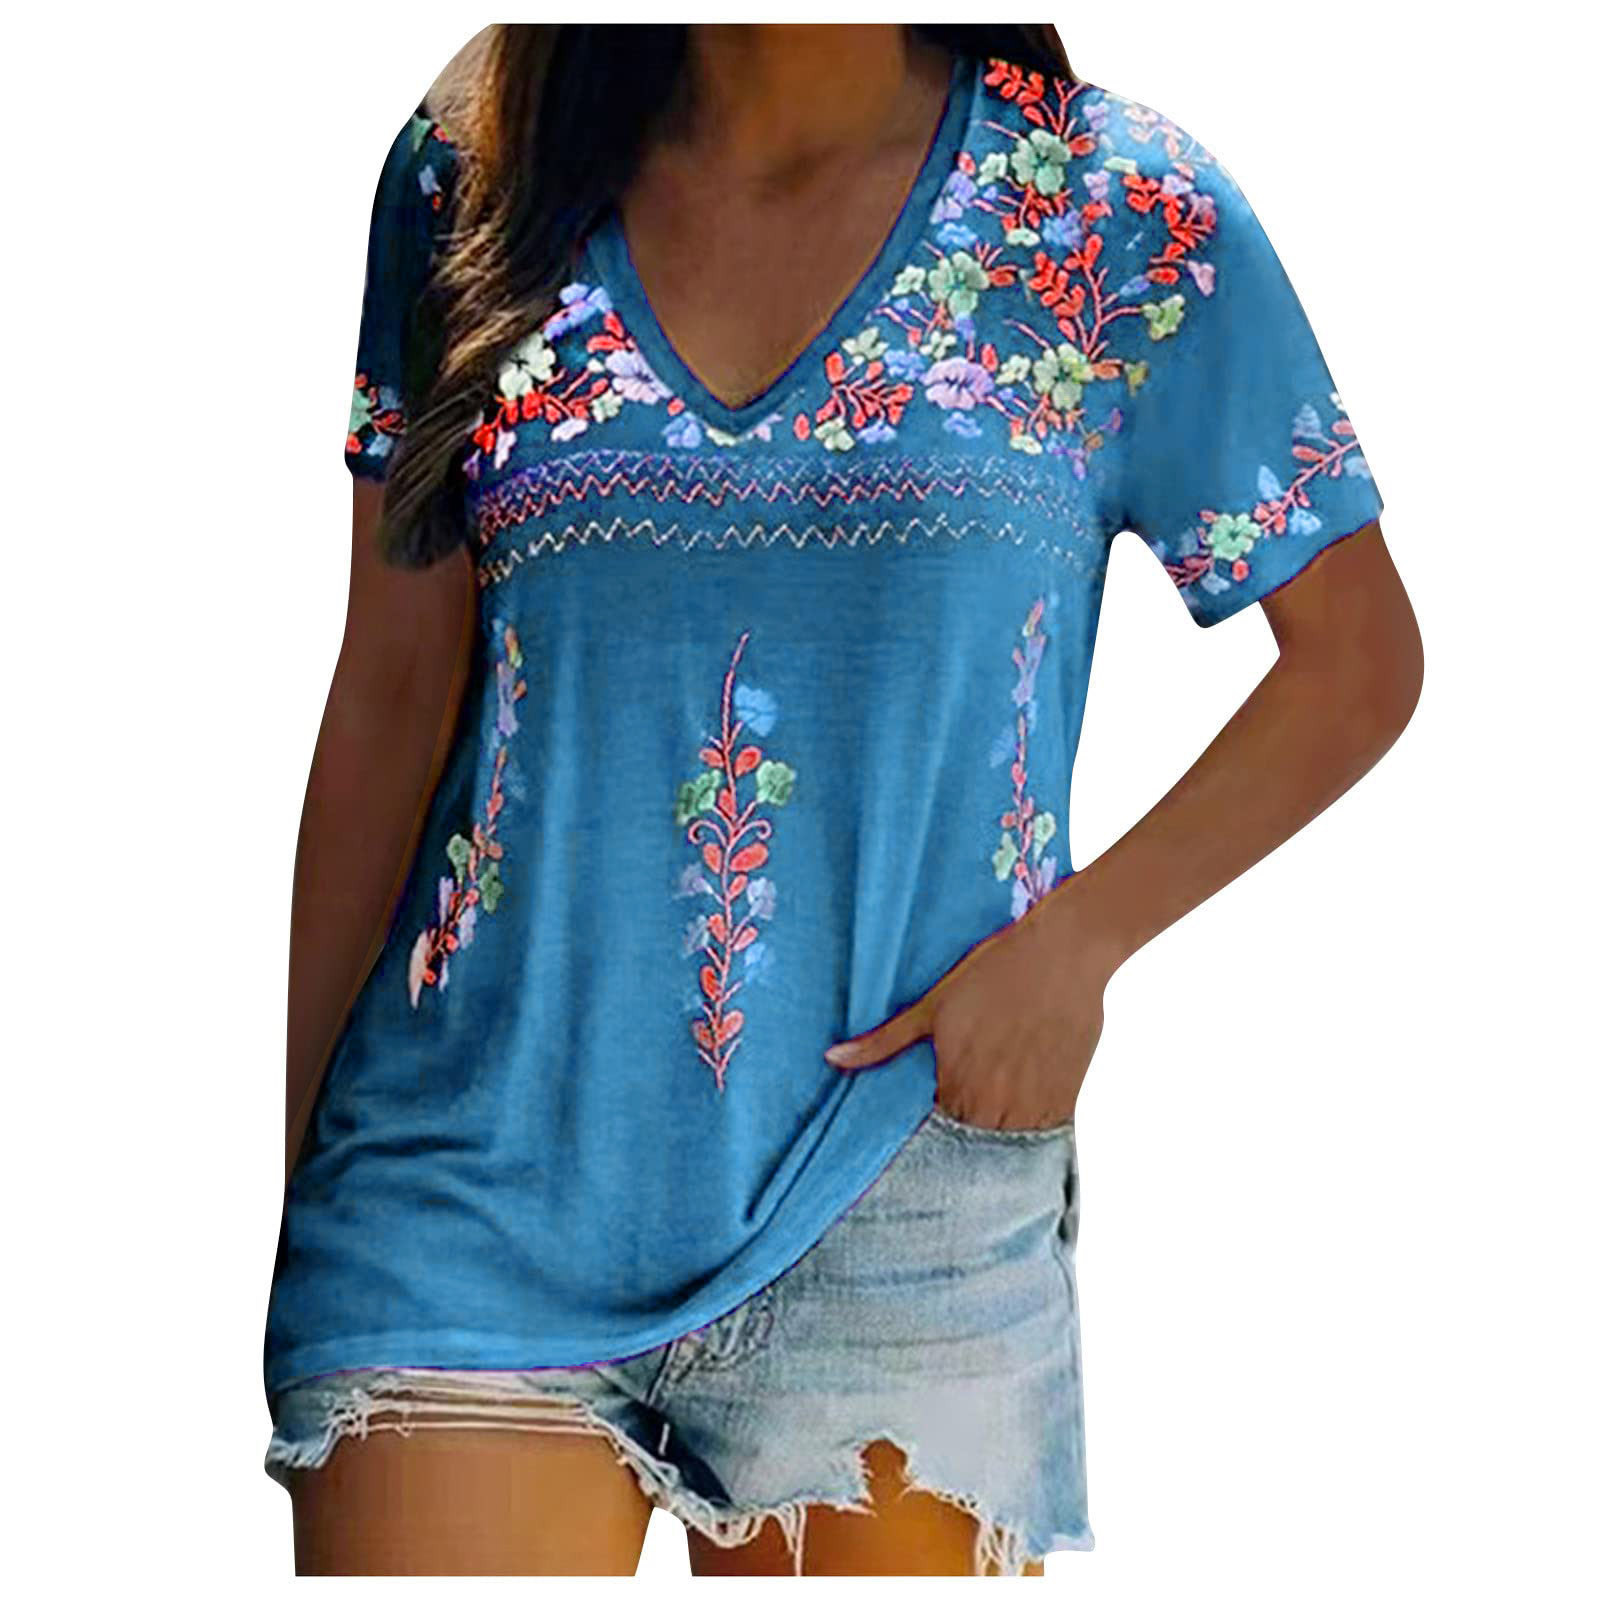 Women Mexican V Neck Shirt Embroidery Flower Pattern Short Sleeve Tee ...